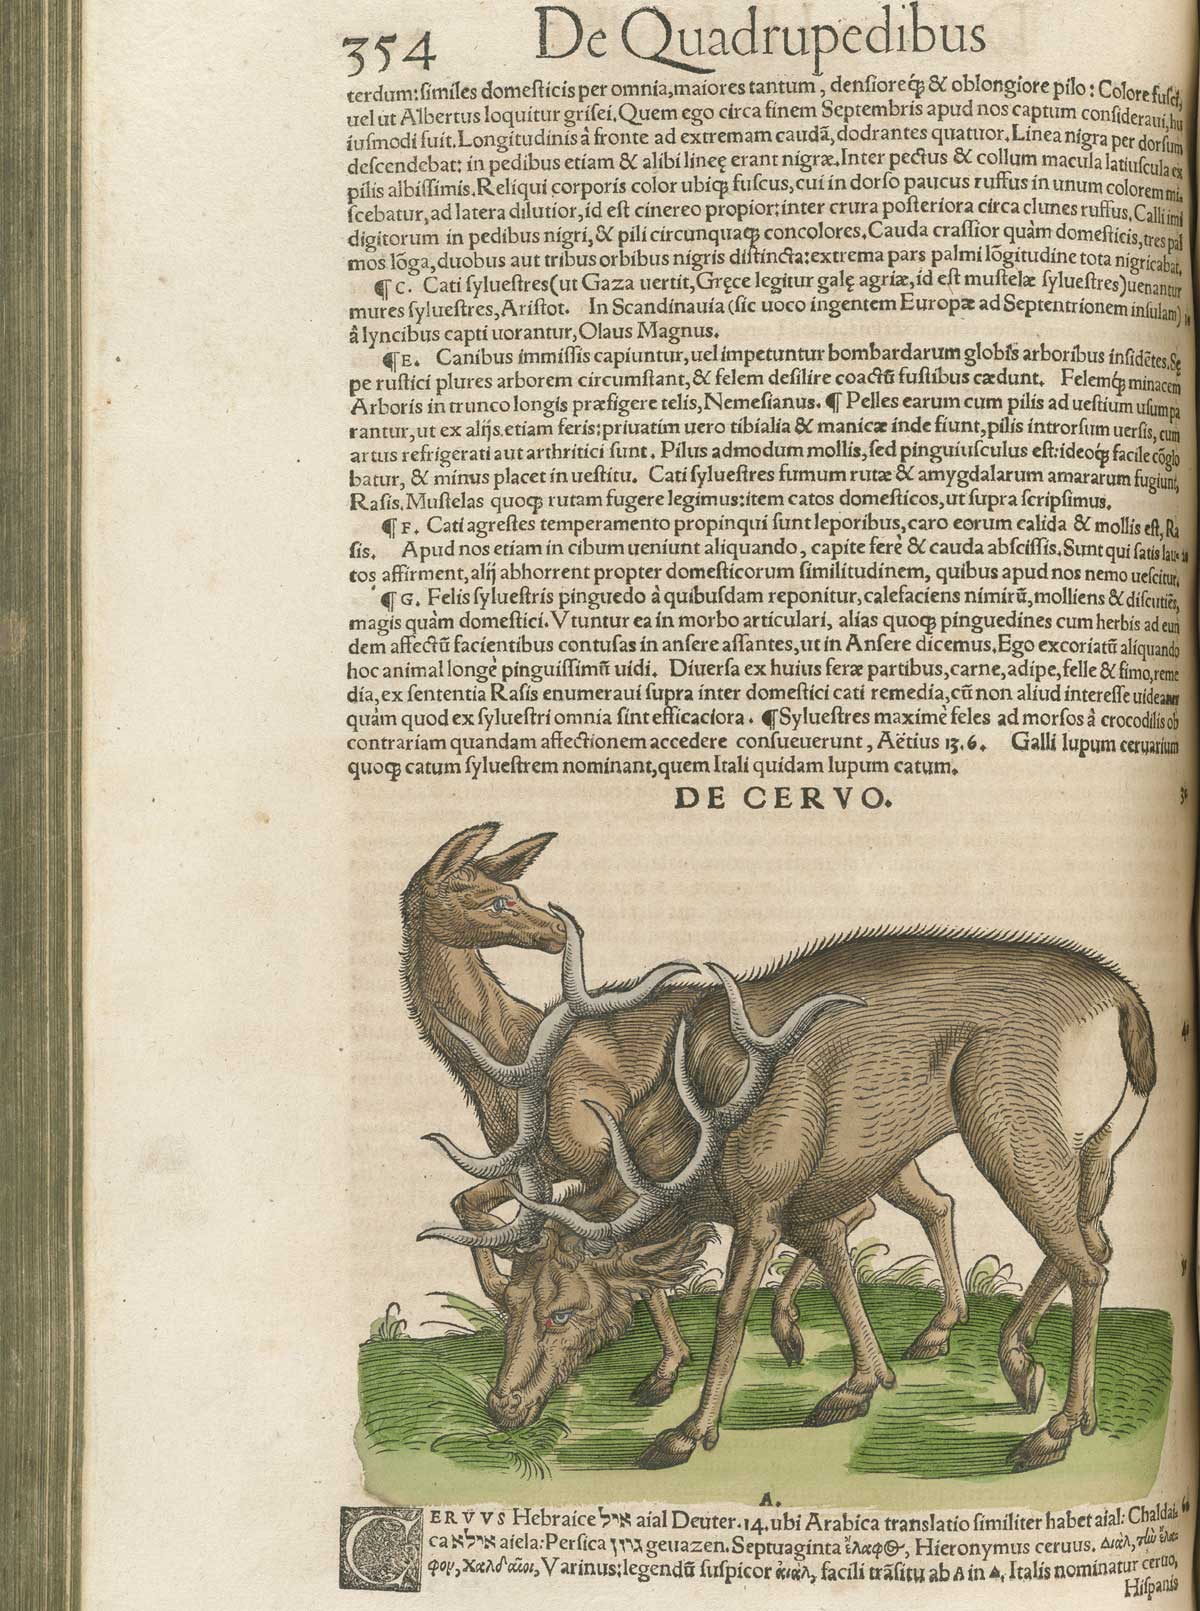 Page 354 from volume 1 of Conrad Gessner's Conradi Gesneri medici Tigurini Historiae animalium, featuring the colored woodcut of de cervo or a male and female deer.